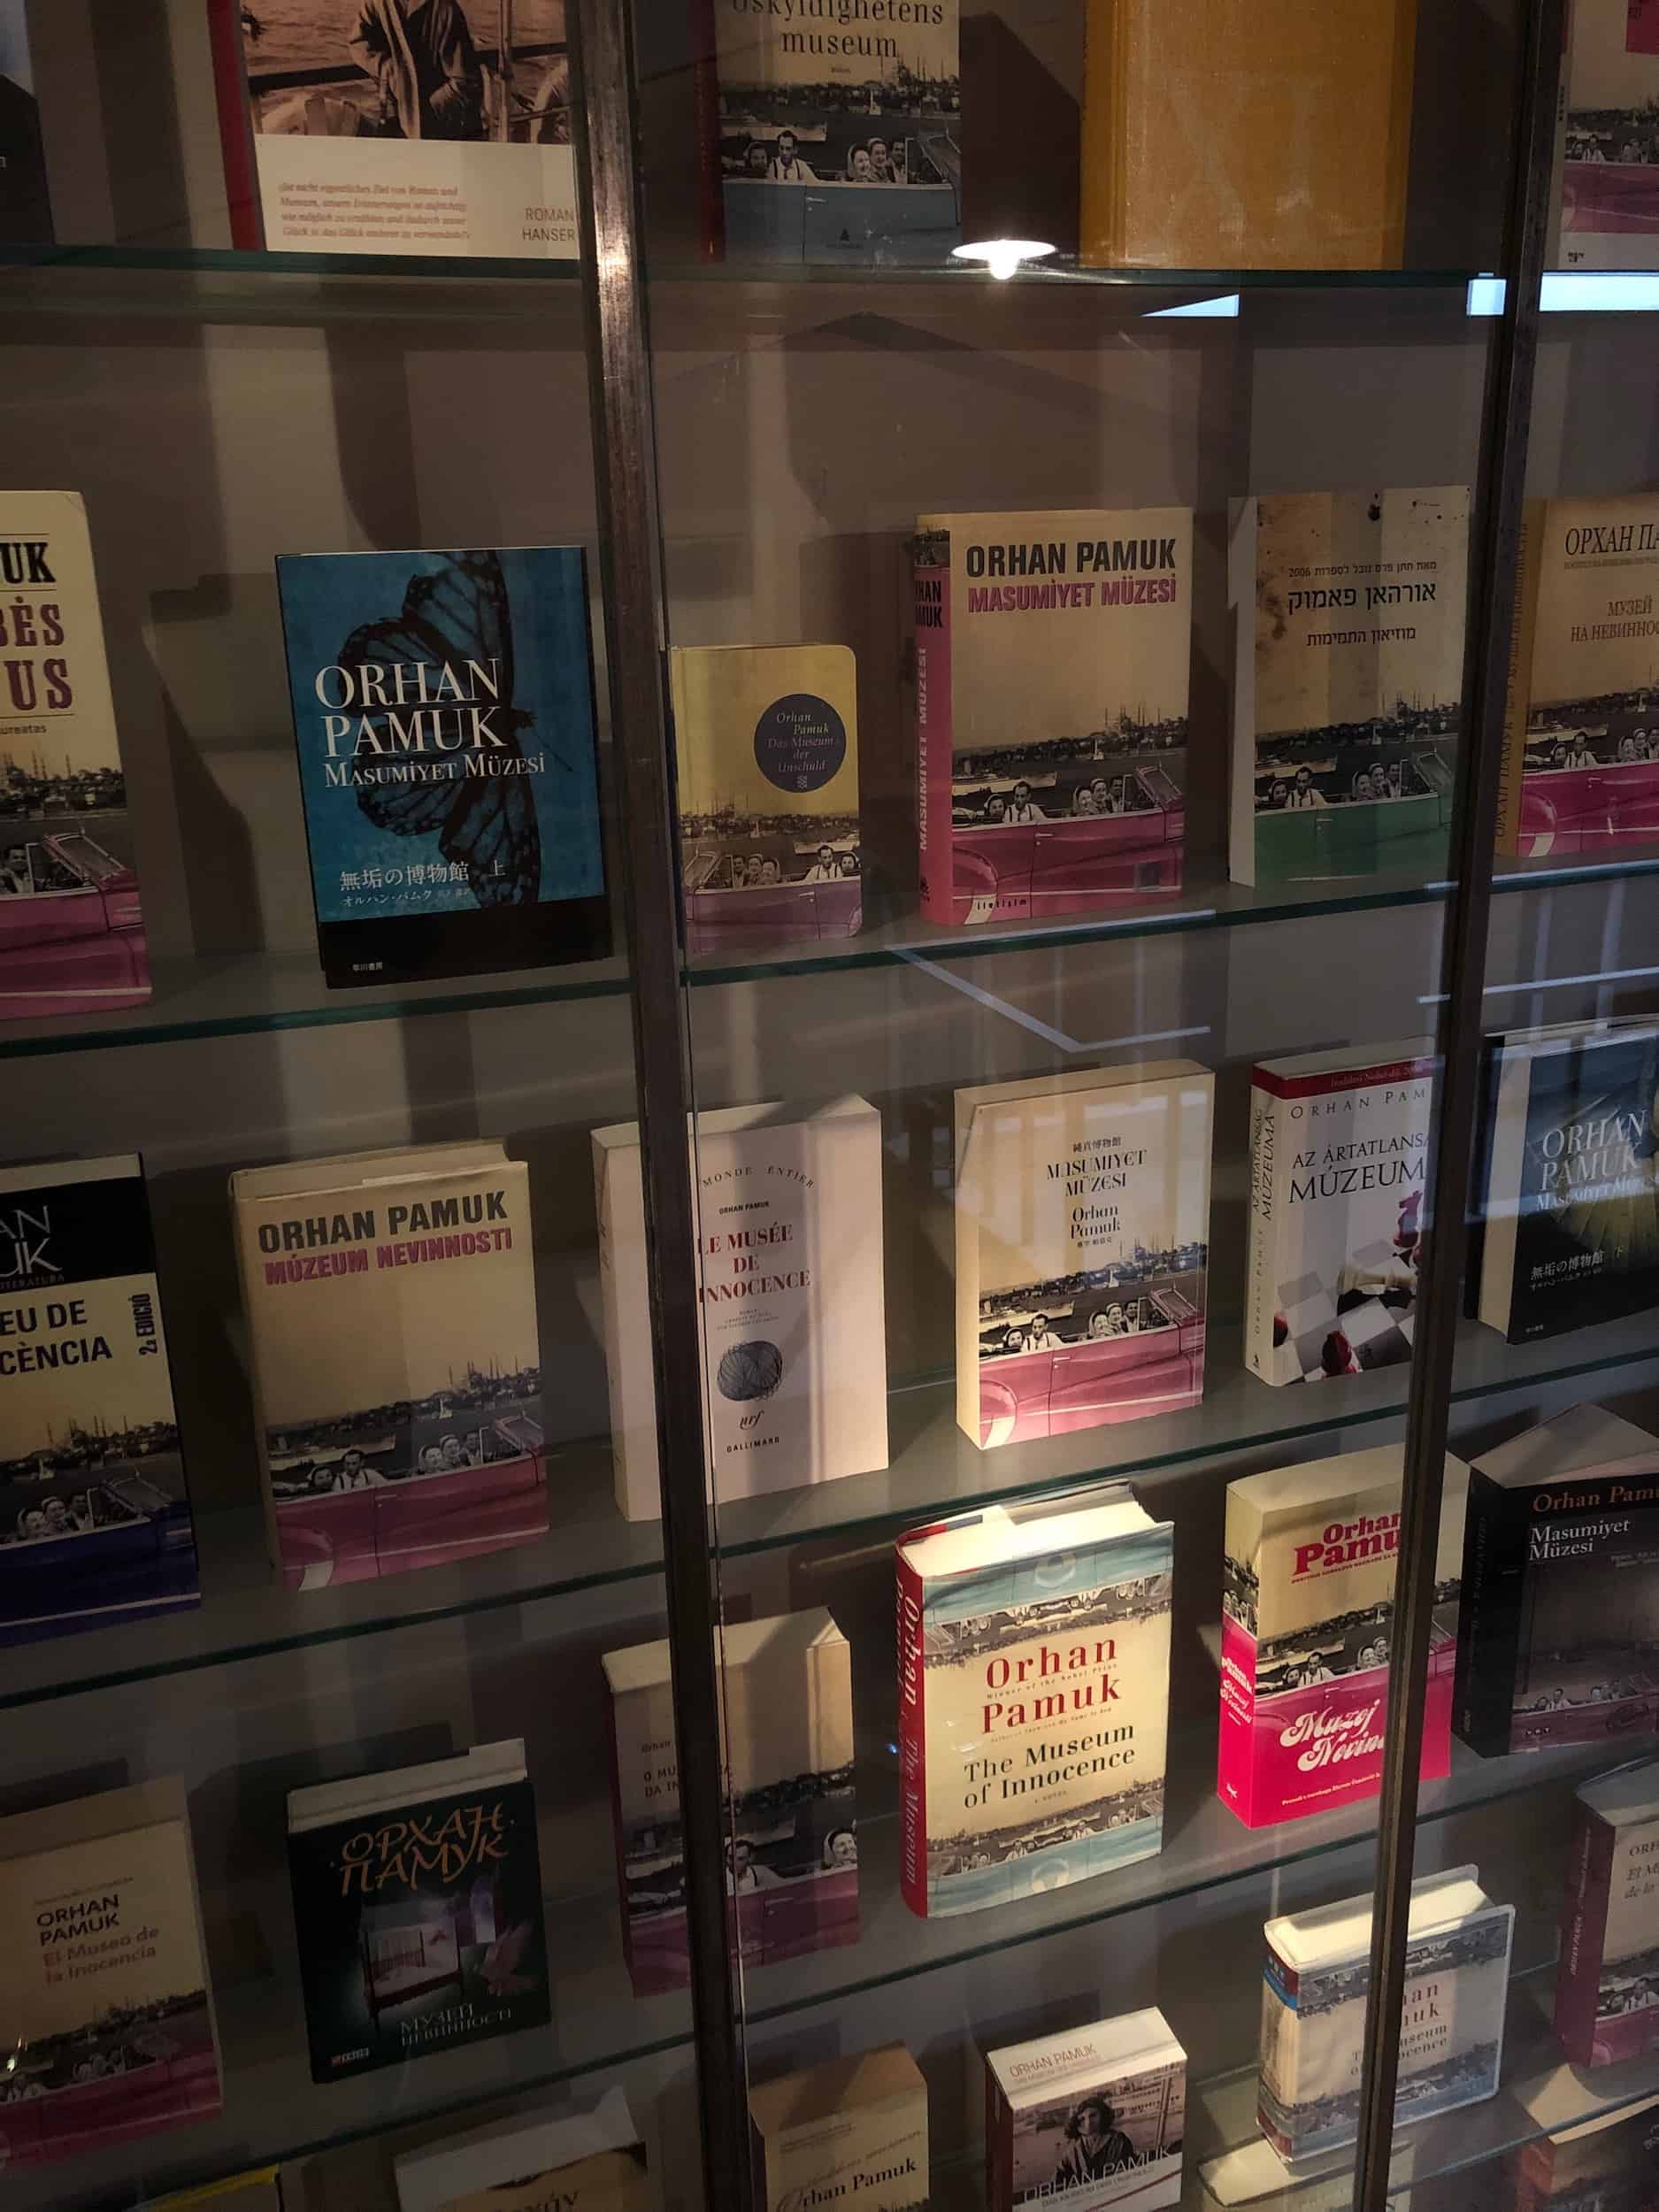 Copies of The Museum of Innocence from different countries